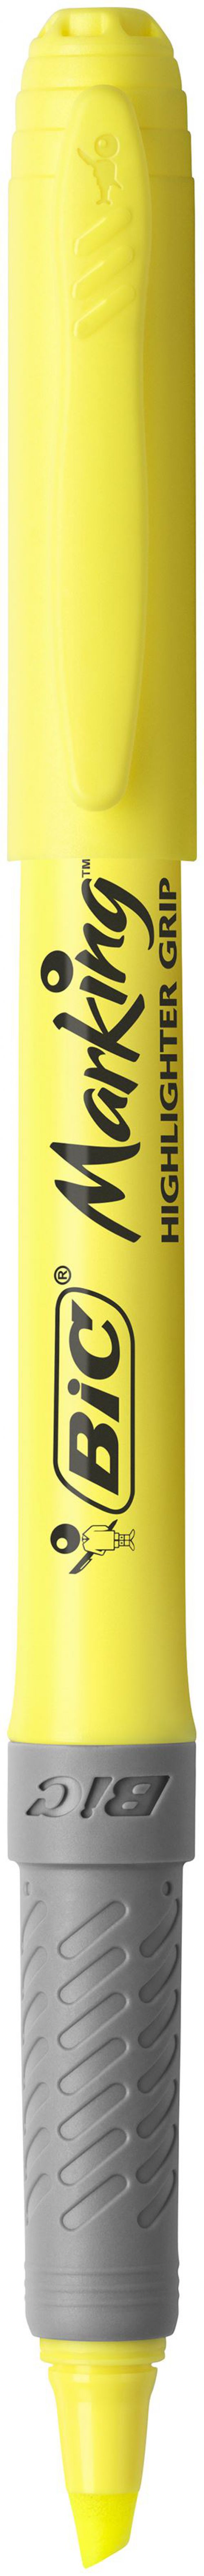 Bic Brite Liner Highlighters Yellow (Pack of 12) 811935